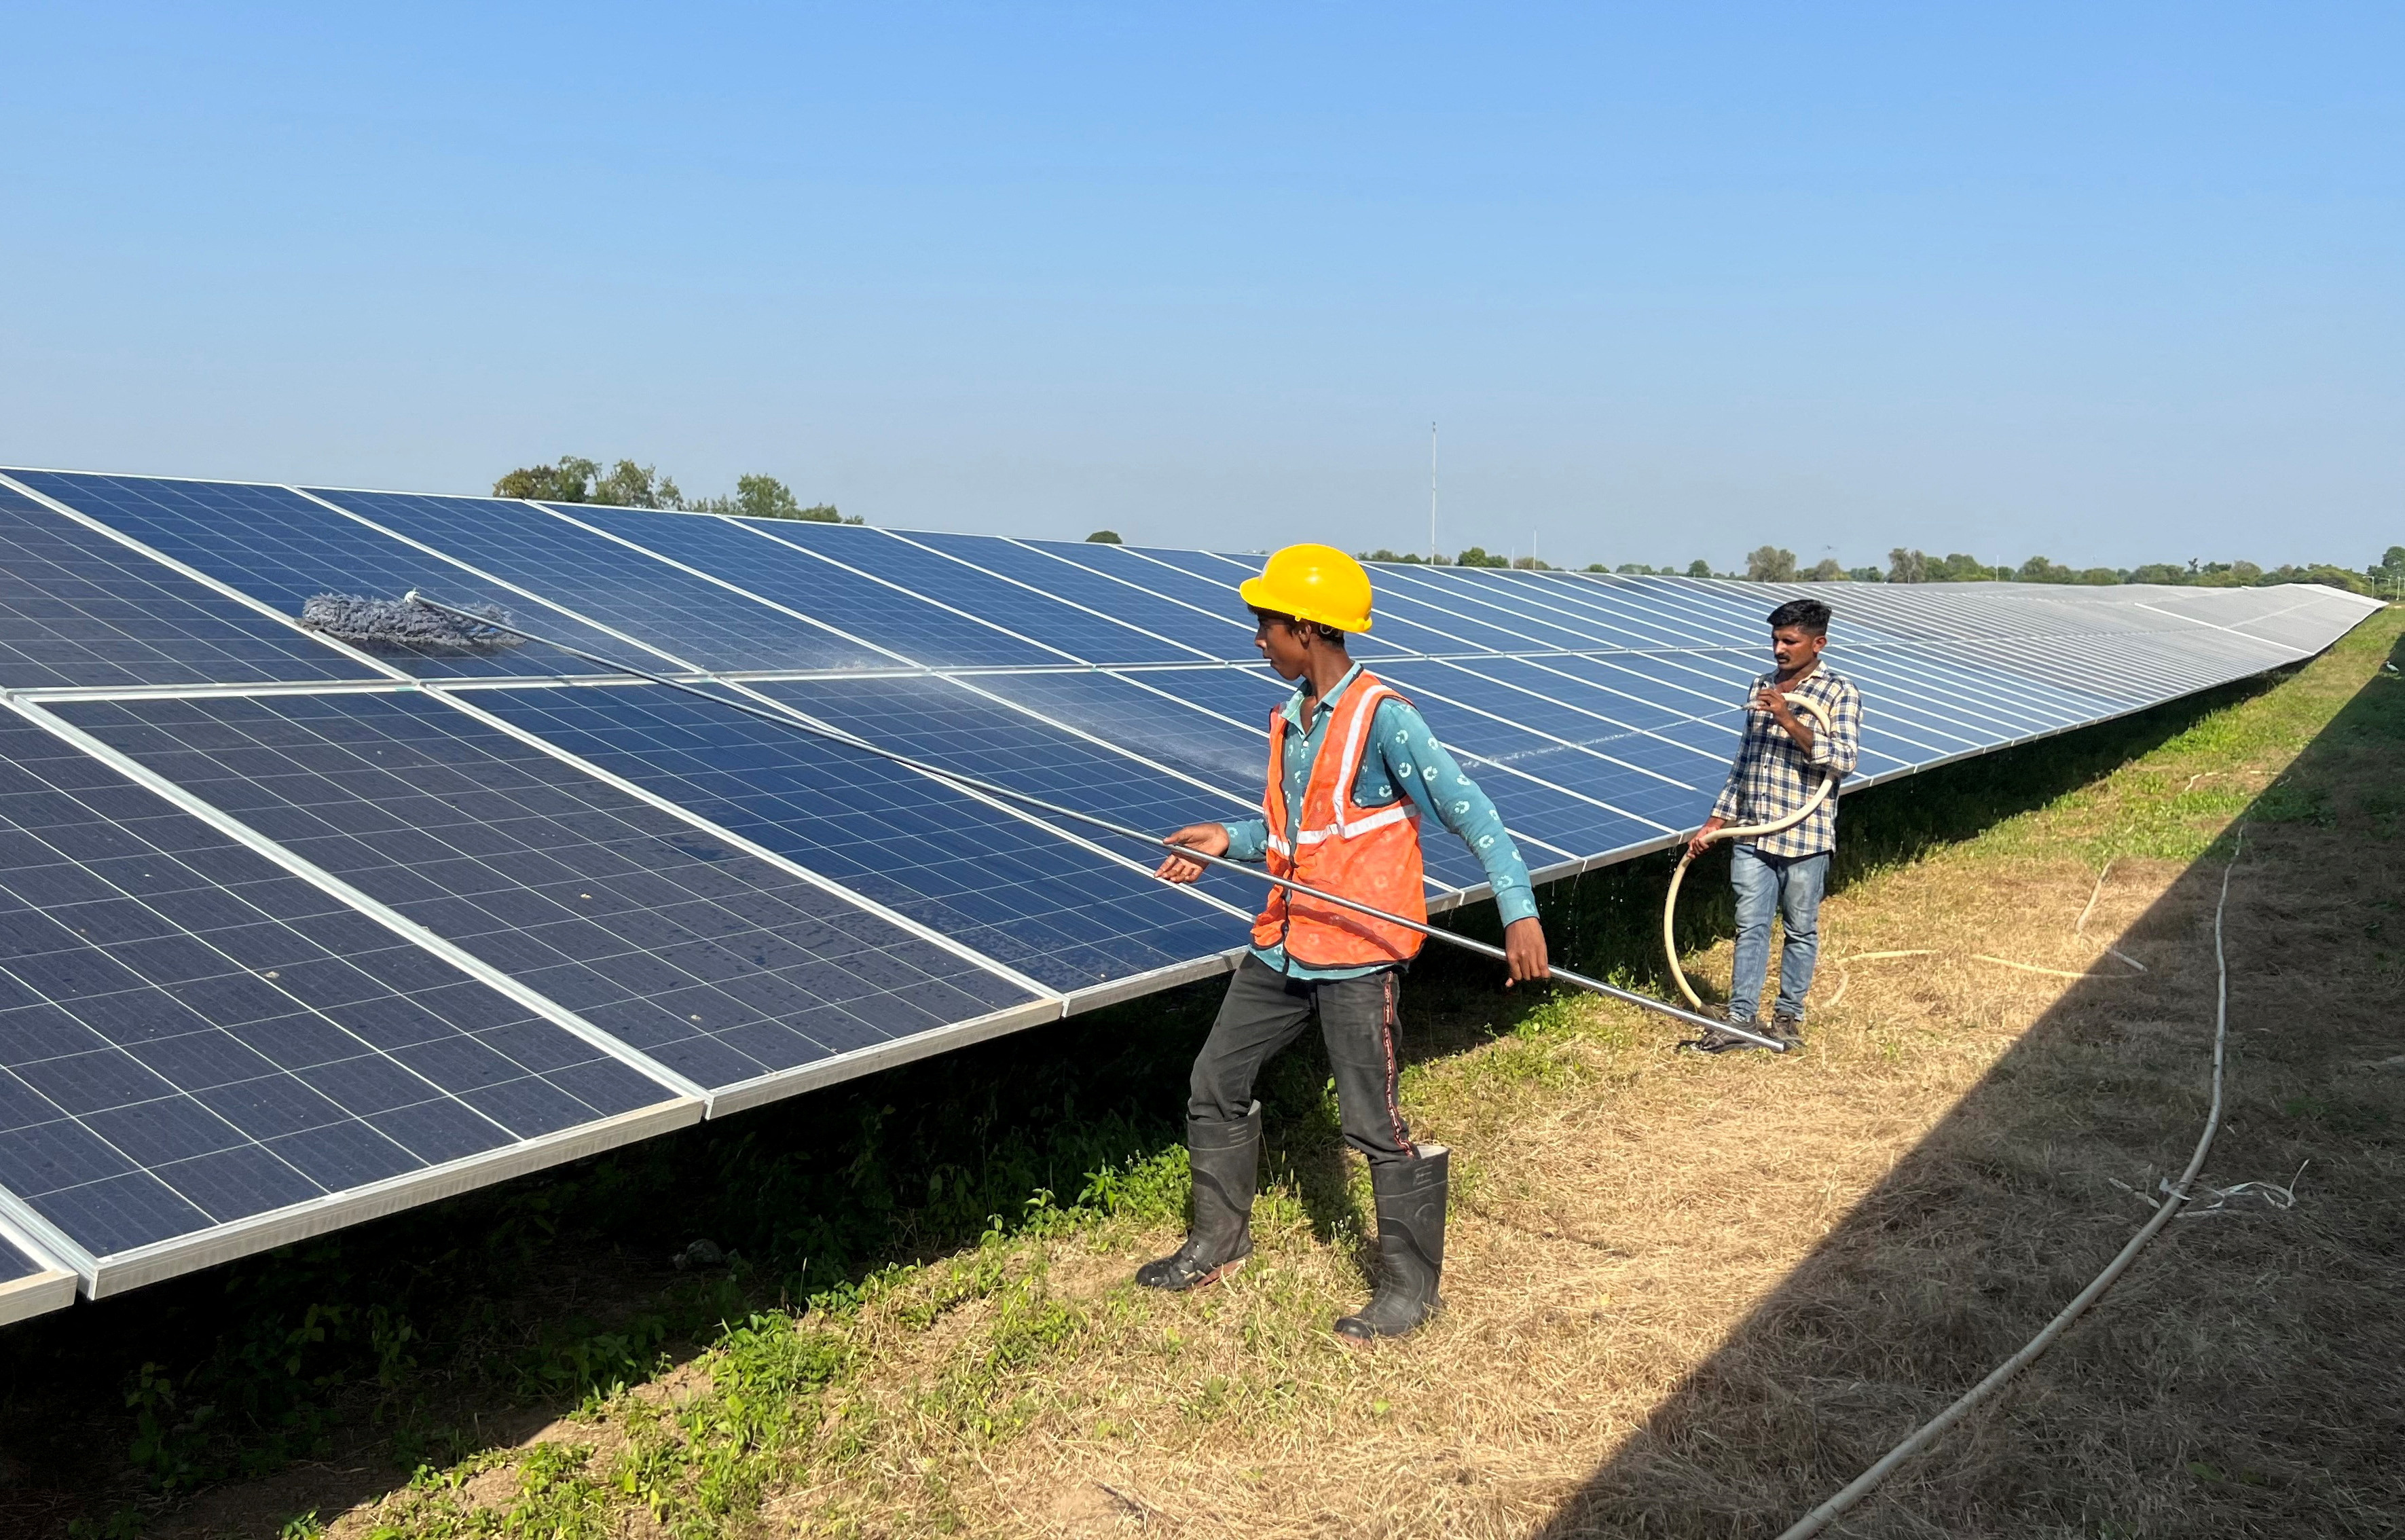 Workers clean panels at a solar park in Modhera